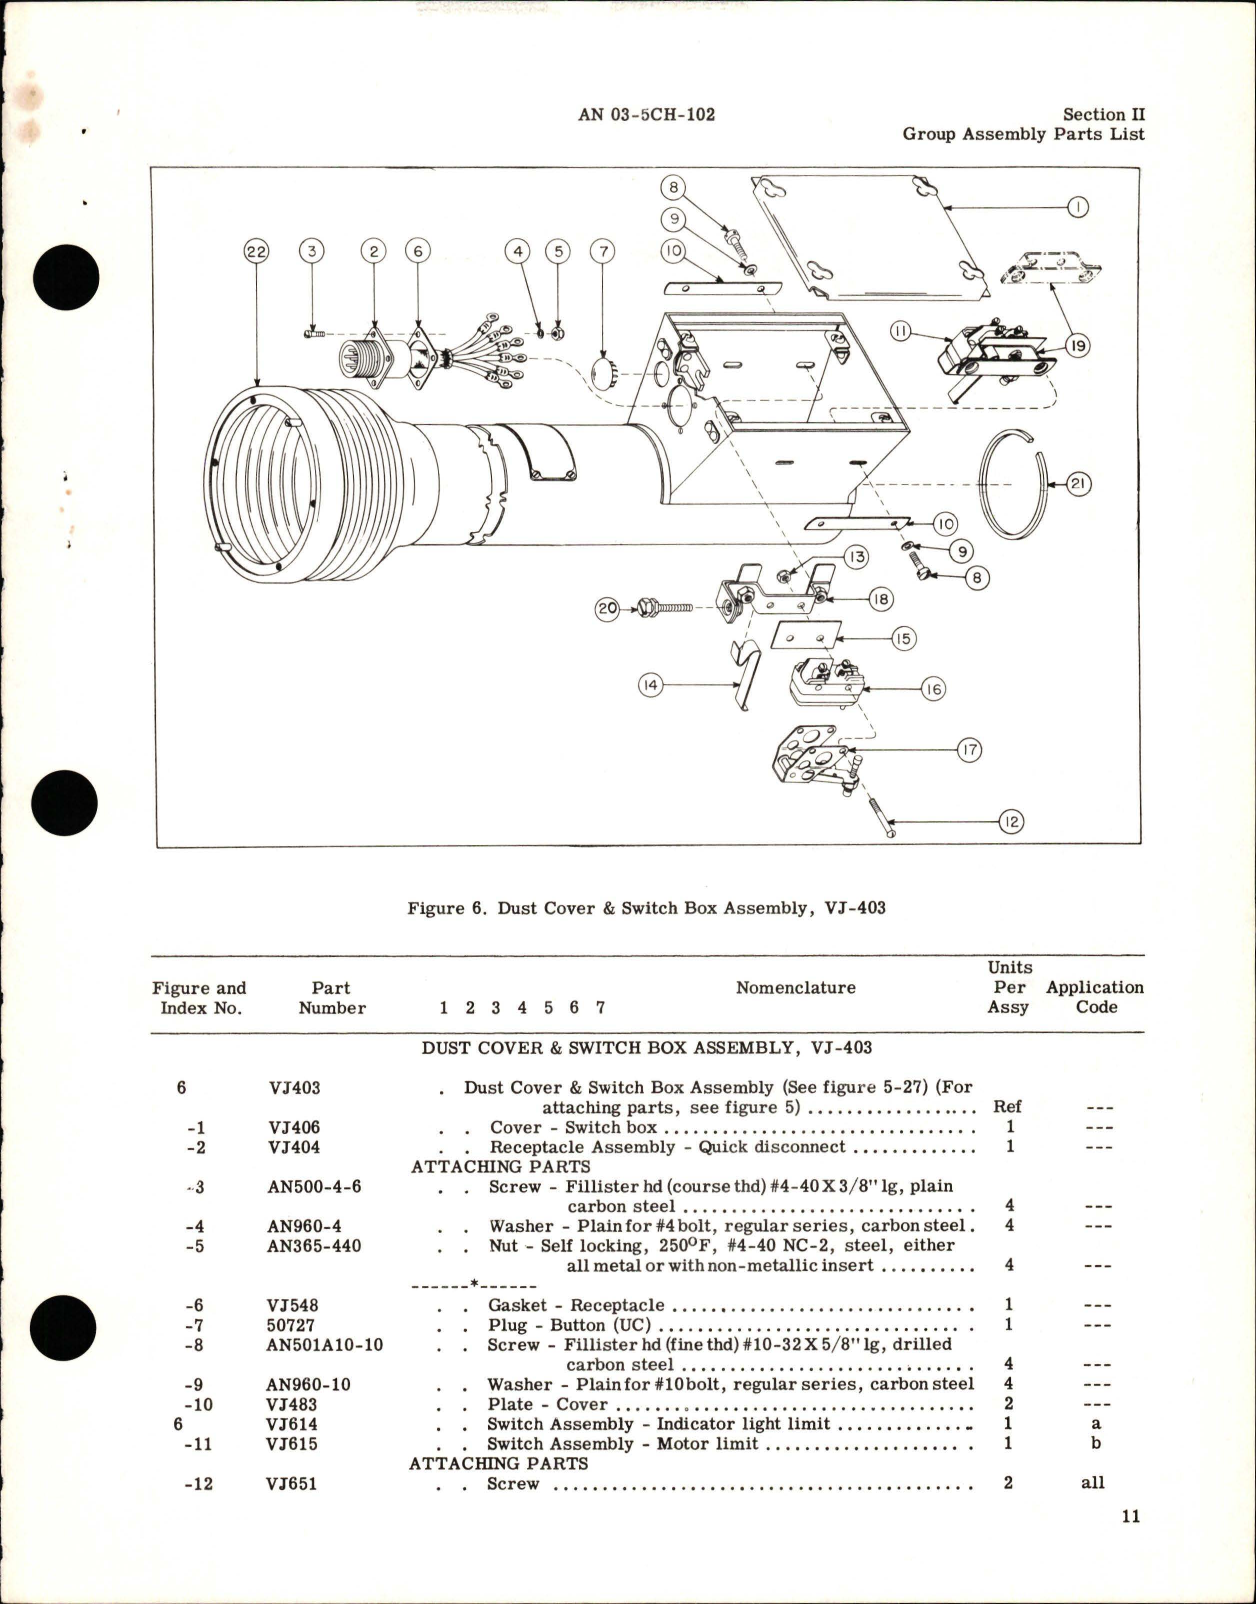 Sample page 5 from AirCorps Library document: Parts Catalog for Main Landing Gear Actuator - Part VJ-550 